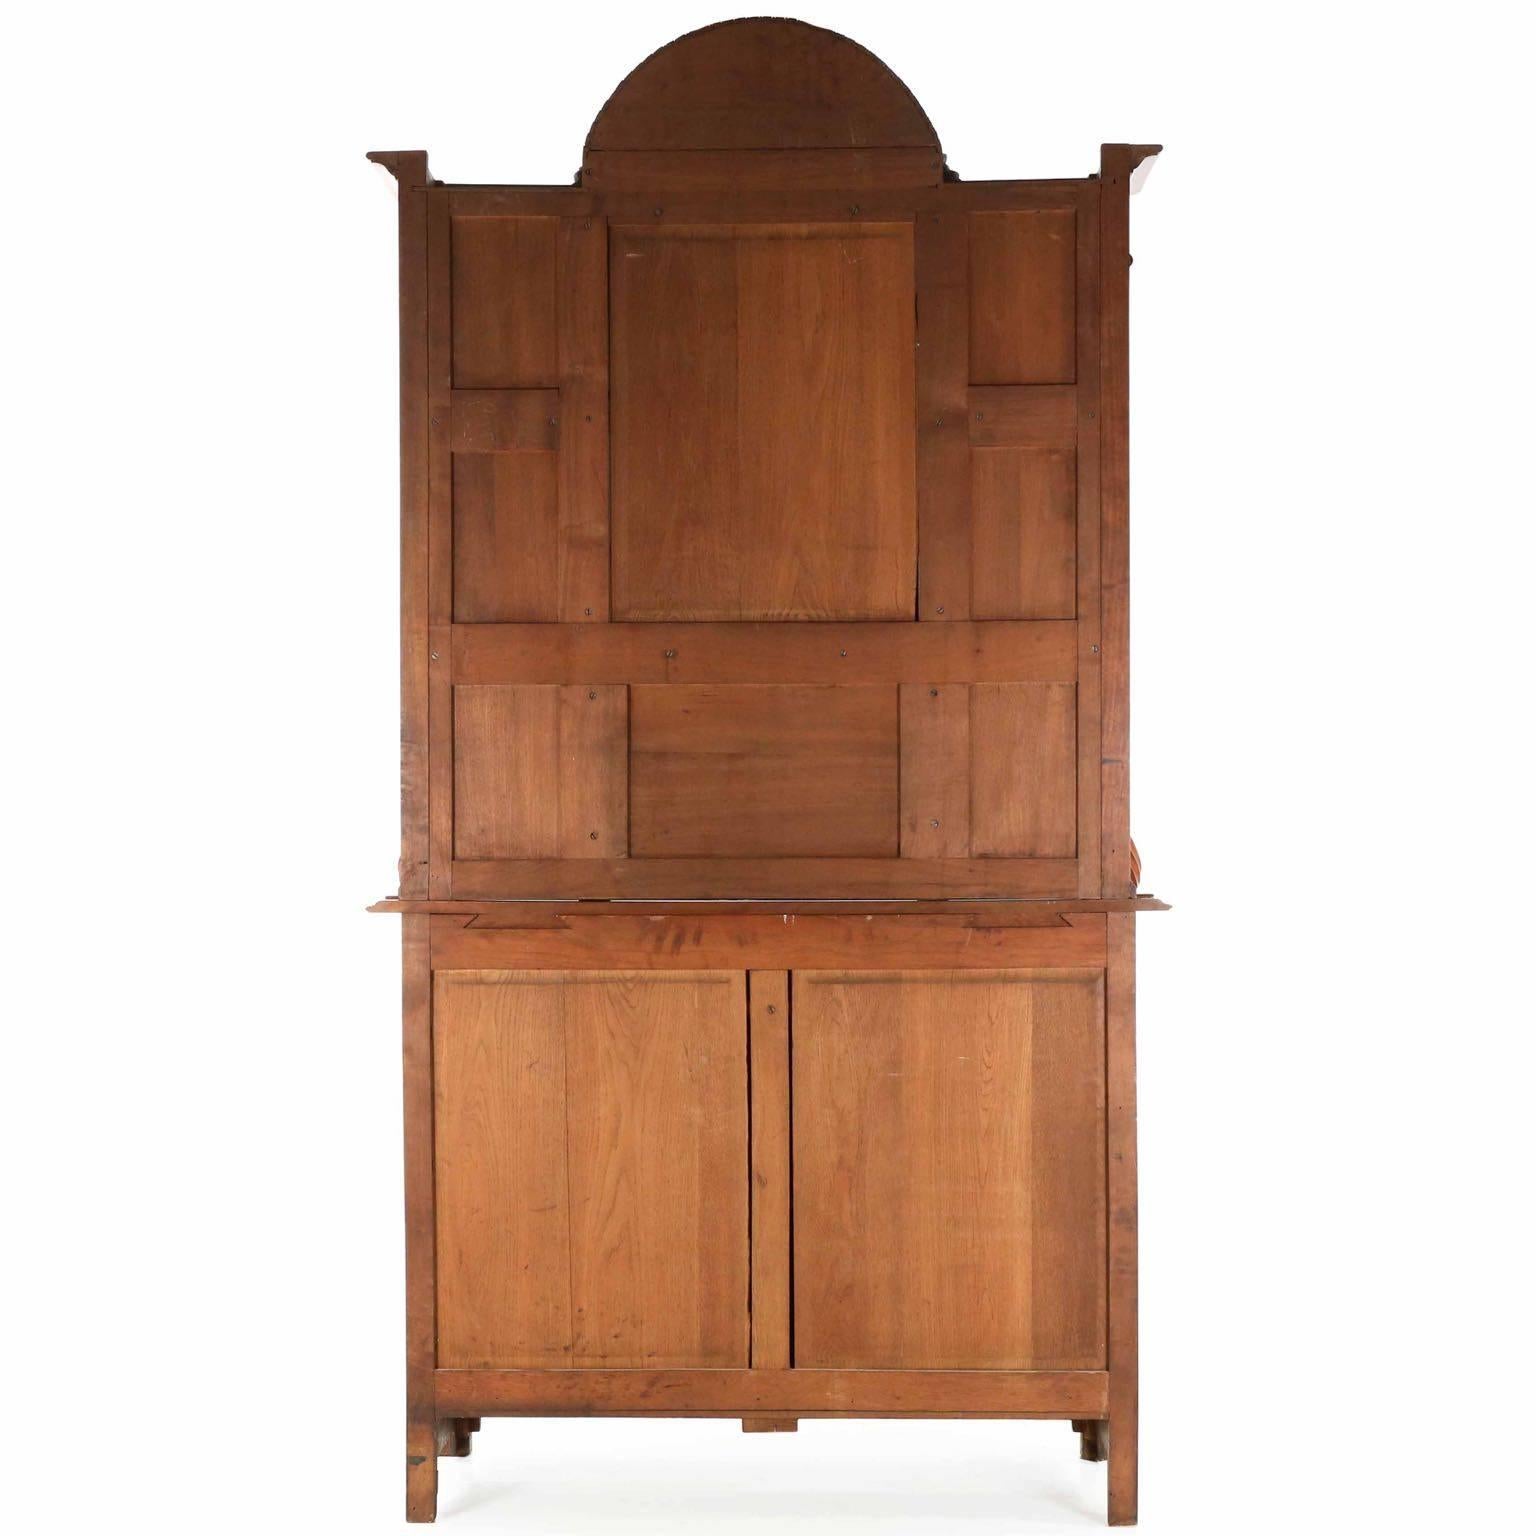 Hand-Crafted French Art Nouveau Finely Carved Walnut Buffet Display Cabinet, circa 1900